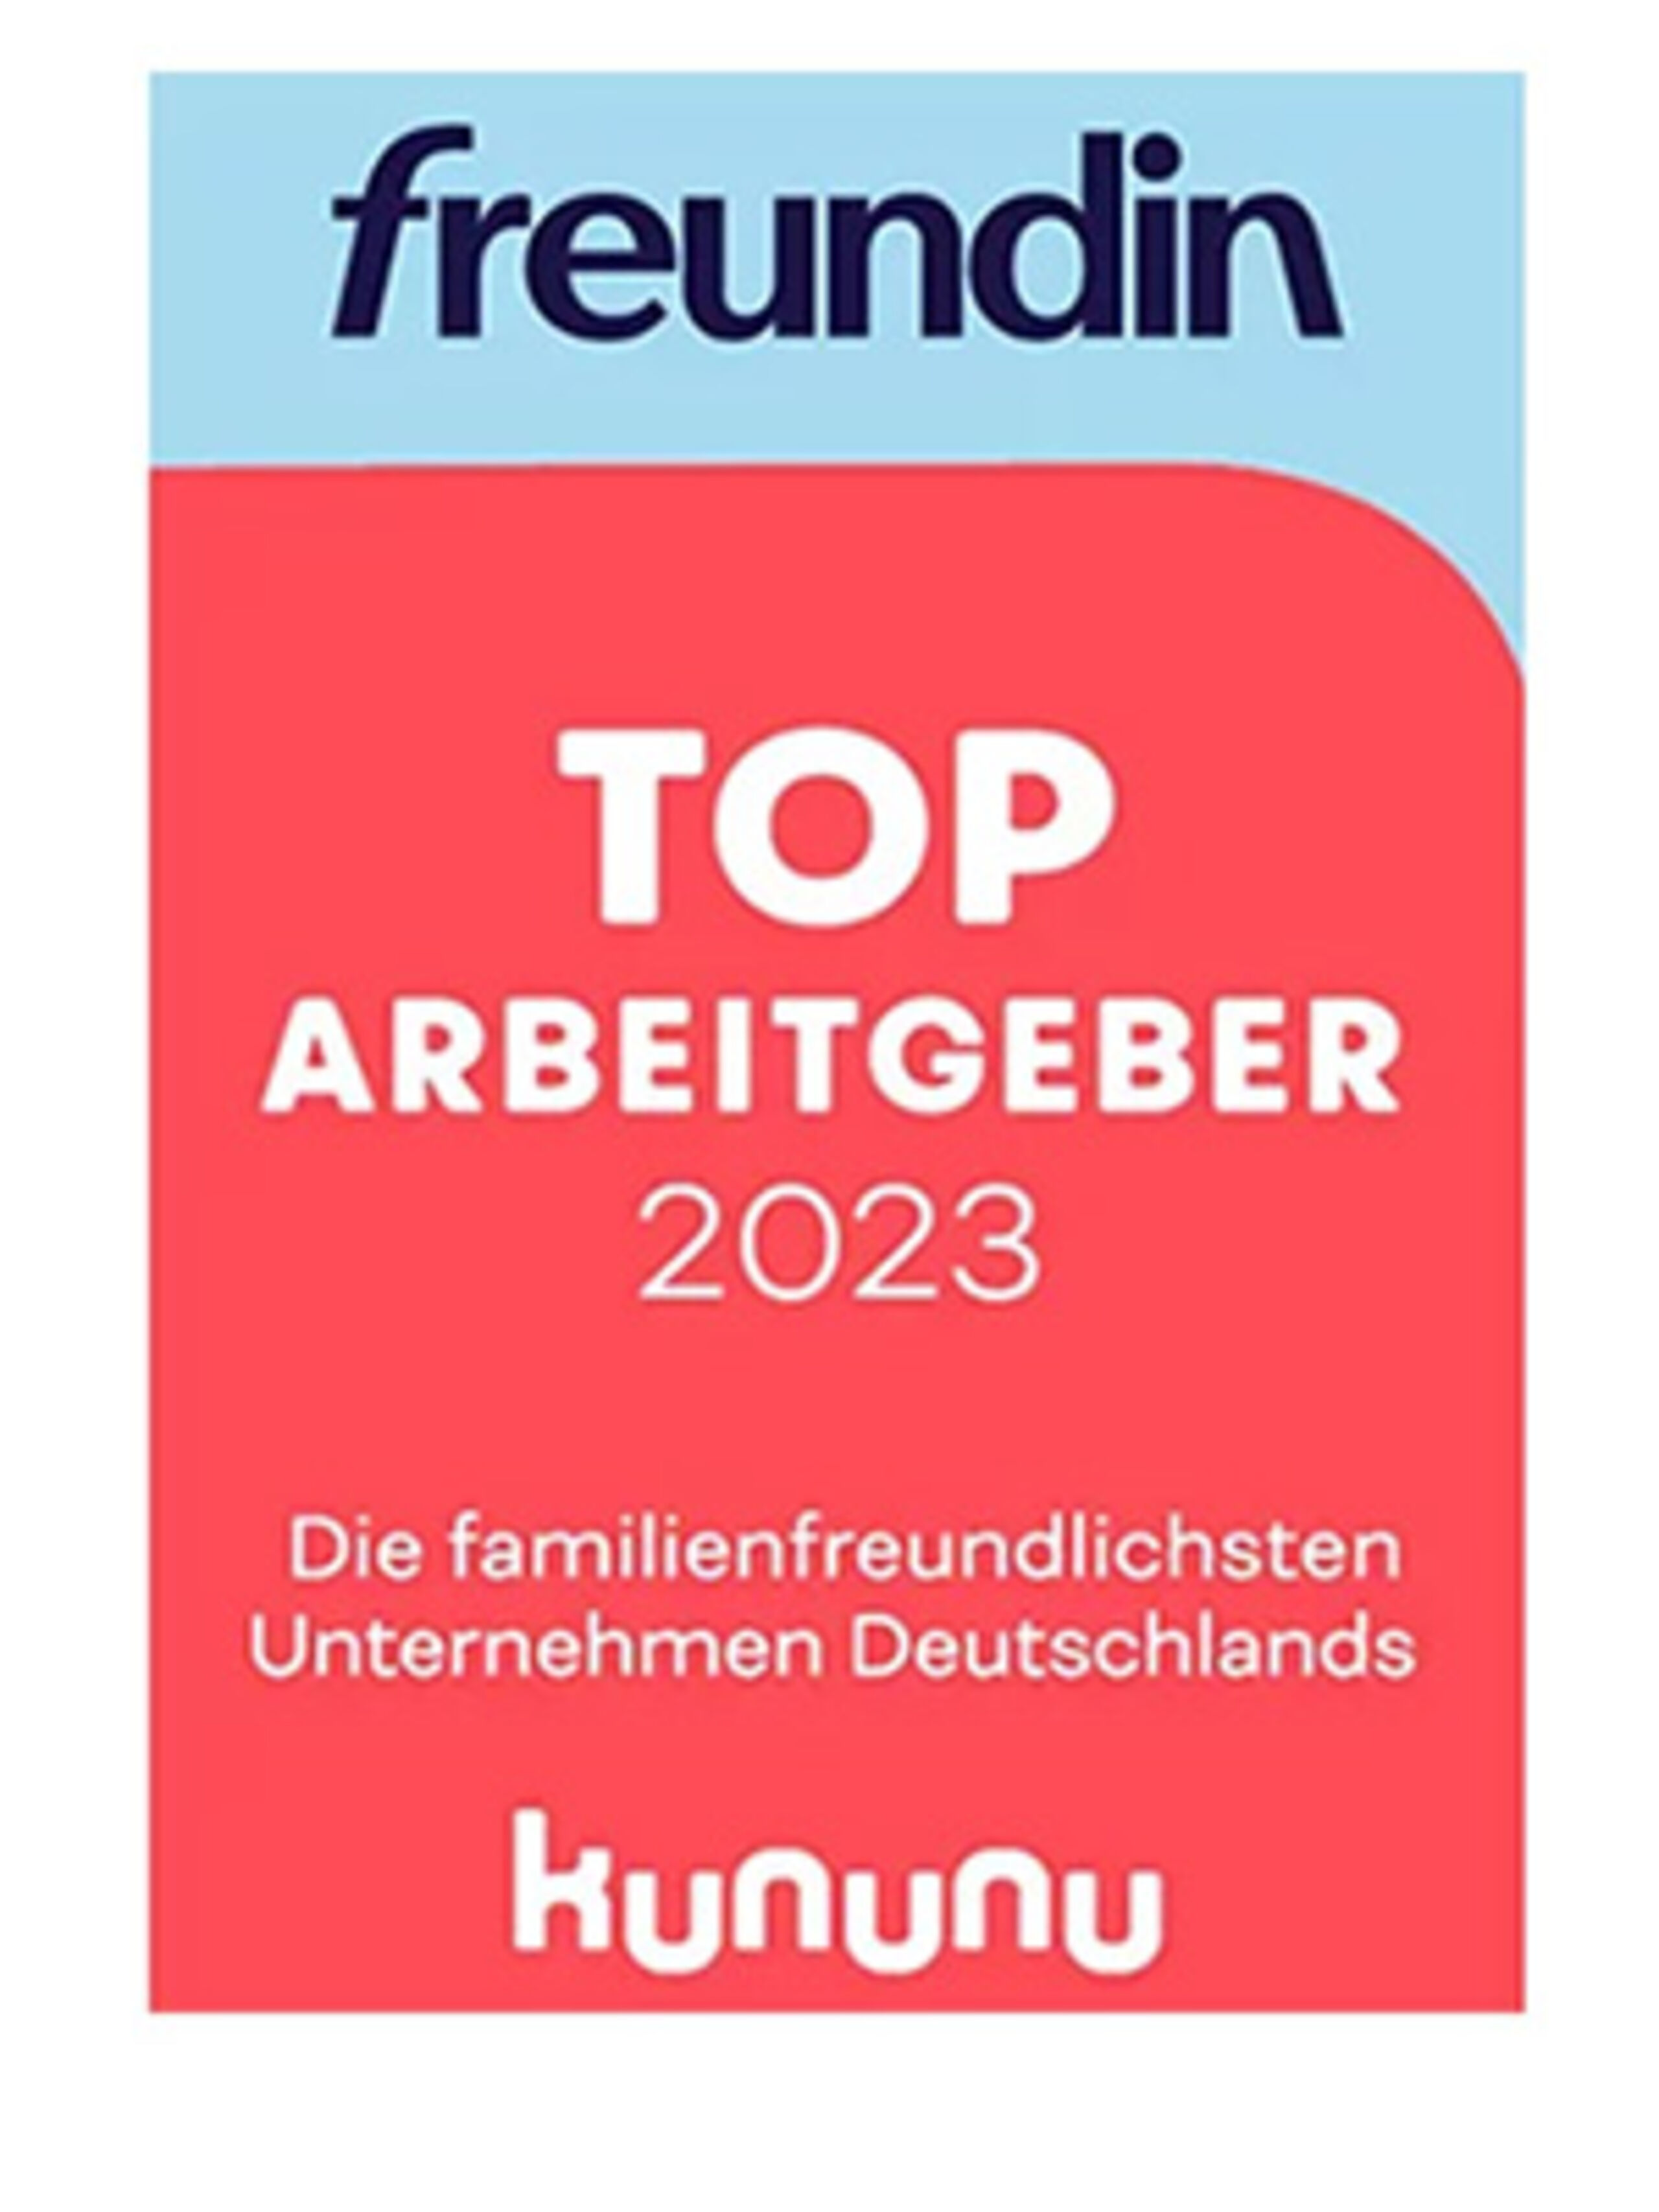 Discover top job offers in Germany with a top employer